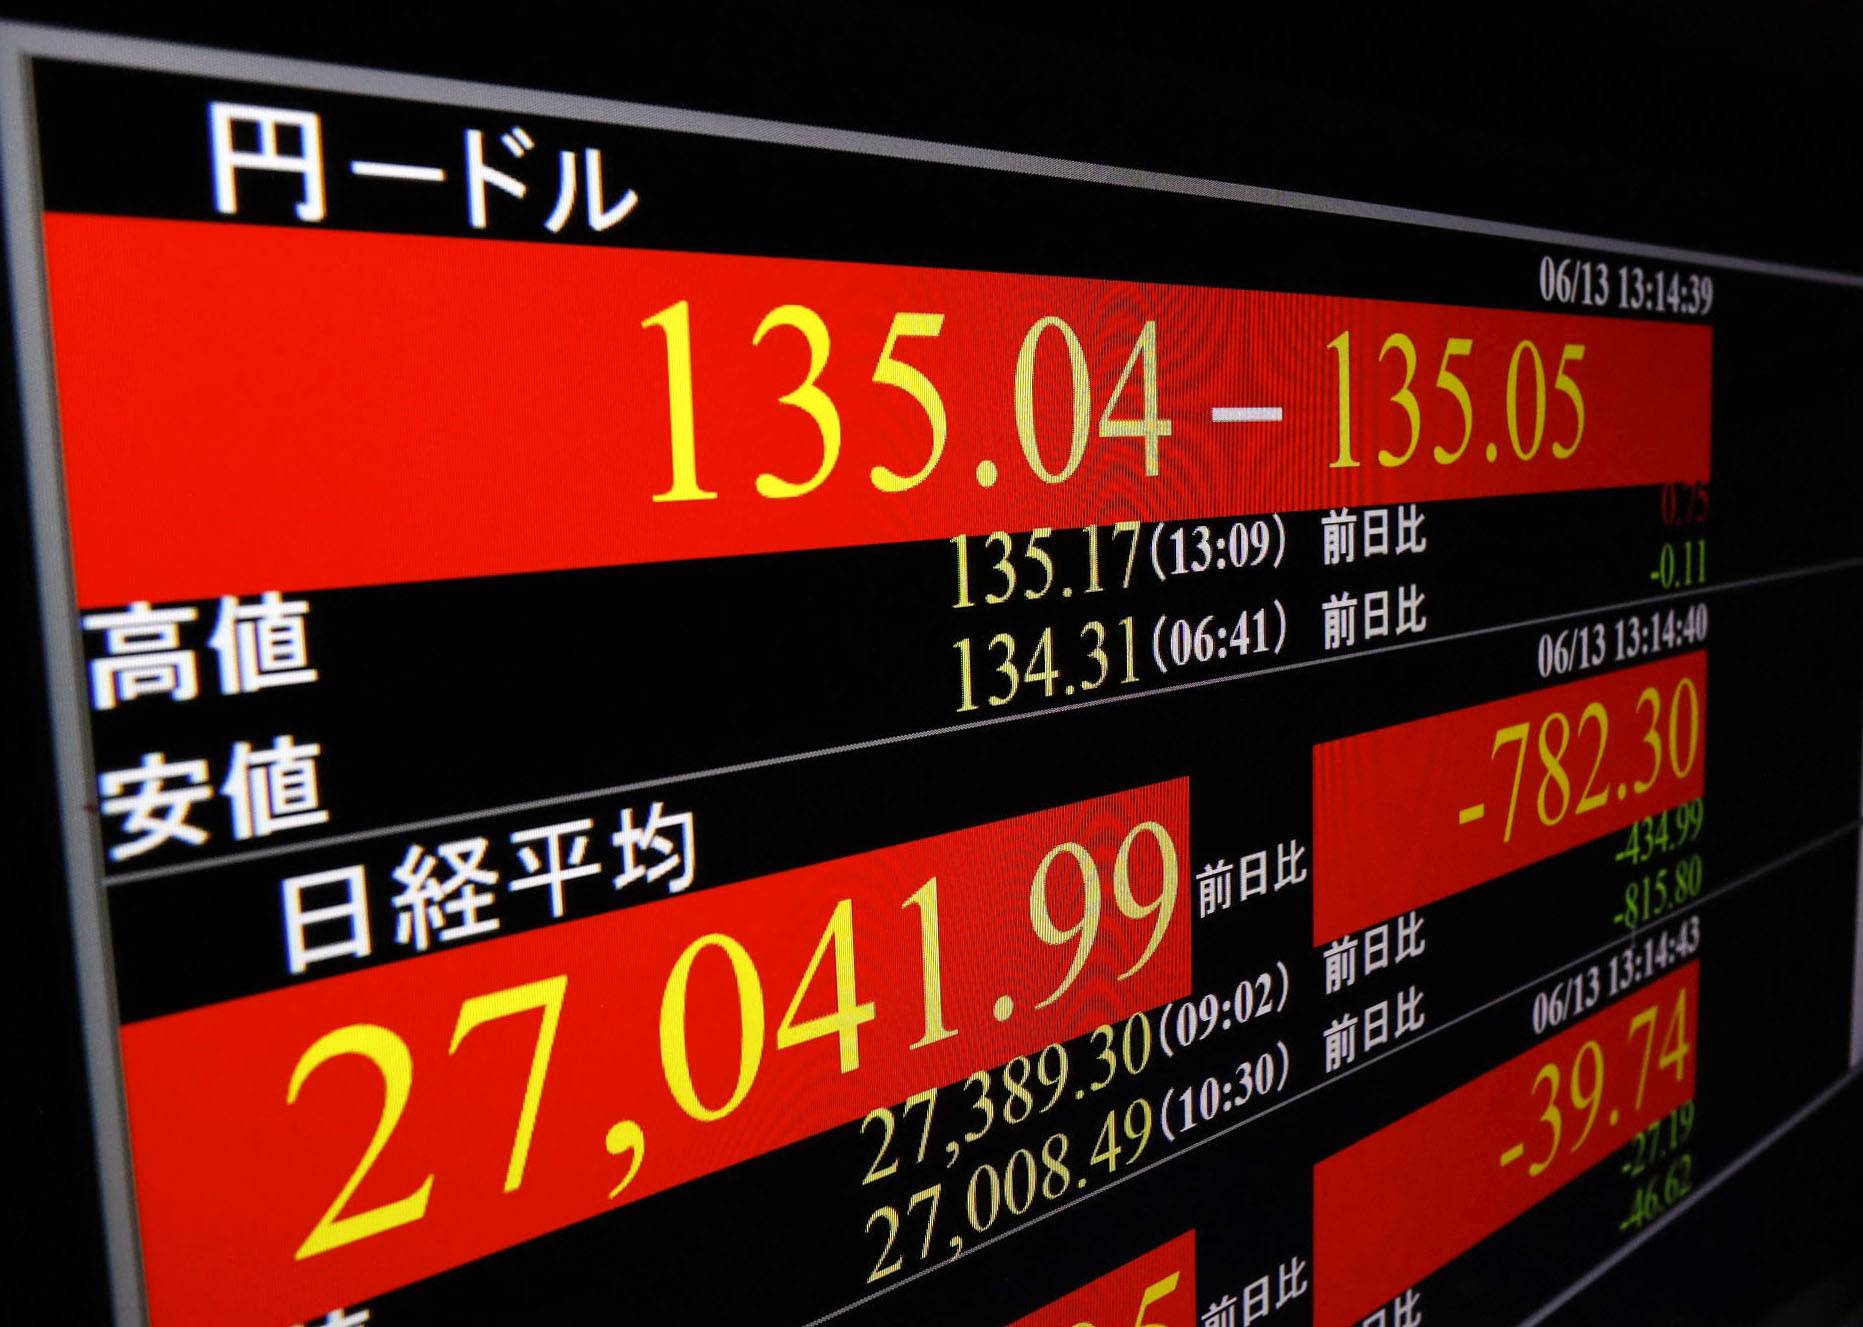 The yen fell below the ¥135 mark against the dollar Monday, with many economists believing the Bank of Japan is unlikely to adjust policy until the yen breaches the ¥140 level per dollar. | KYODO